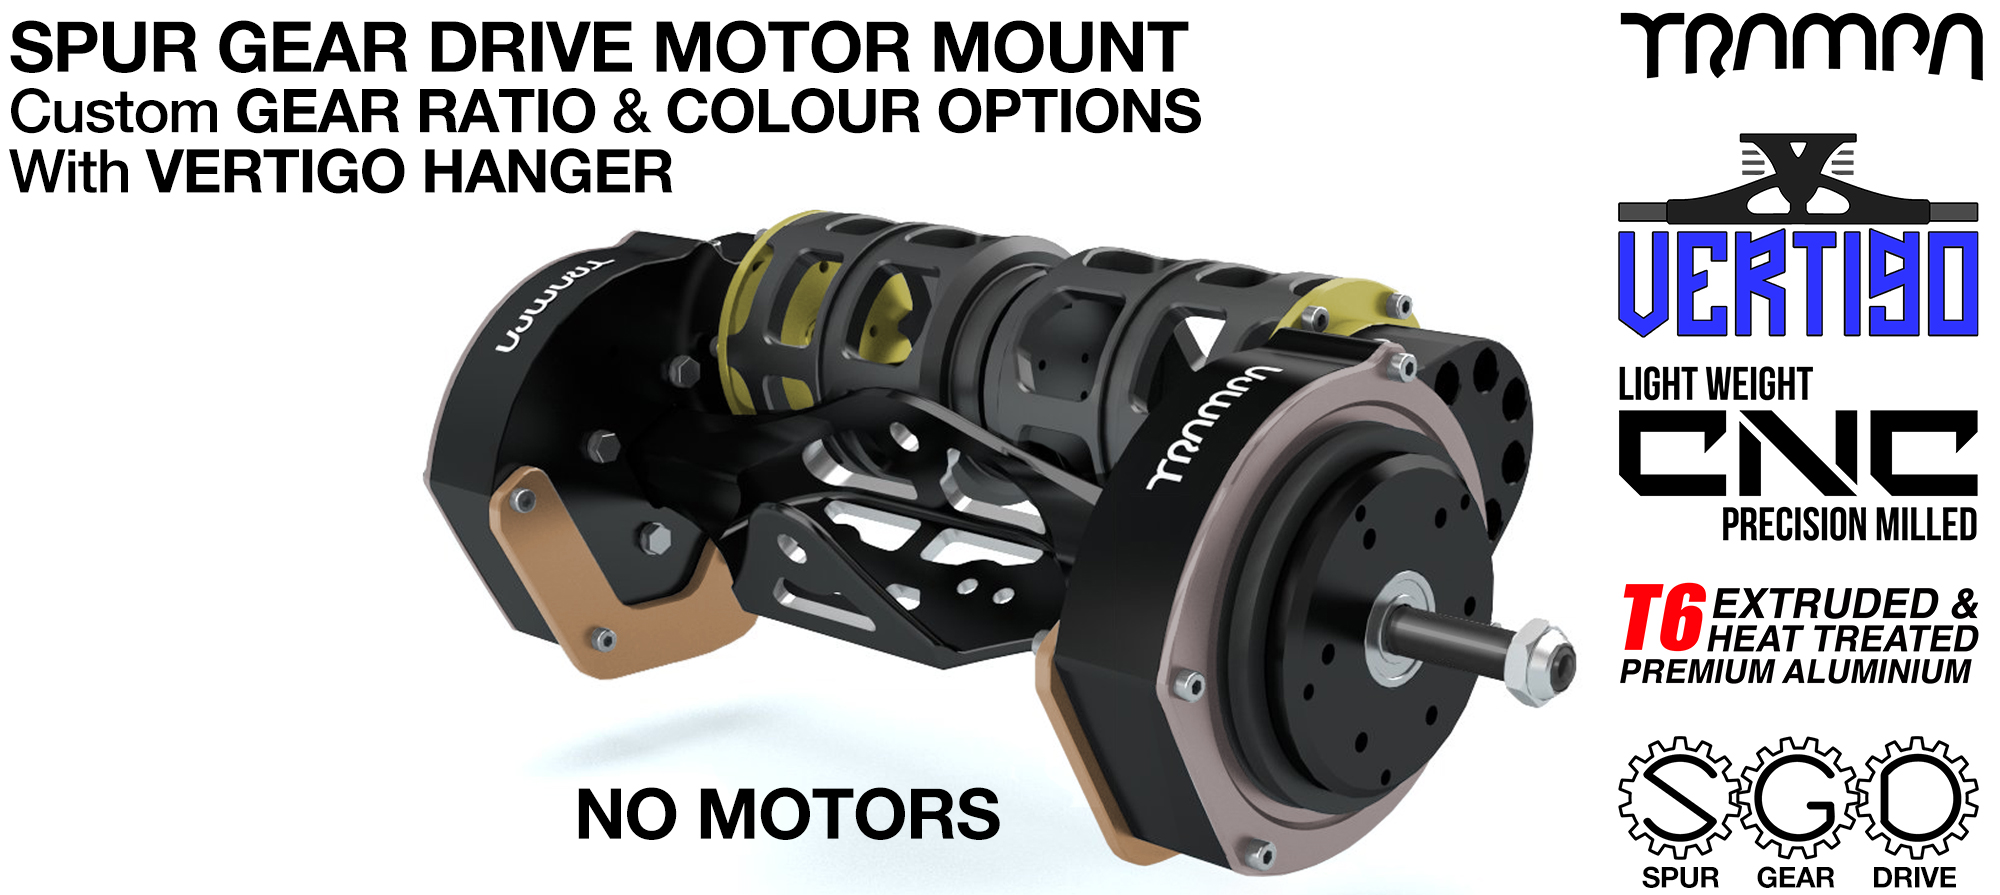 Mountainboard Spur Gear Drive TWIN with PULLEYS & FILTERS Mounted on a Hanger 